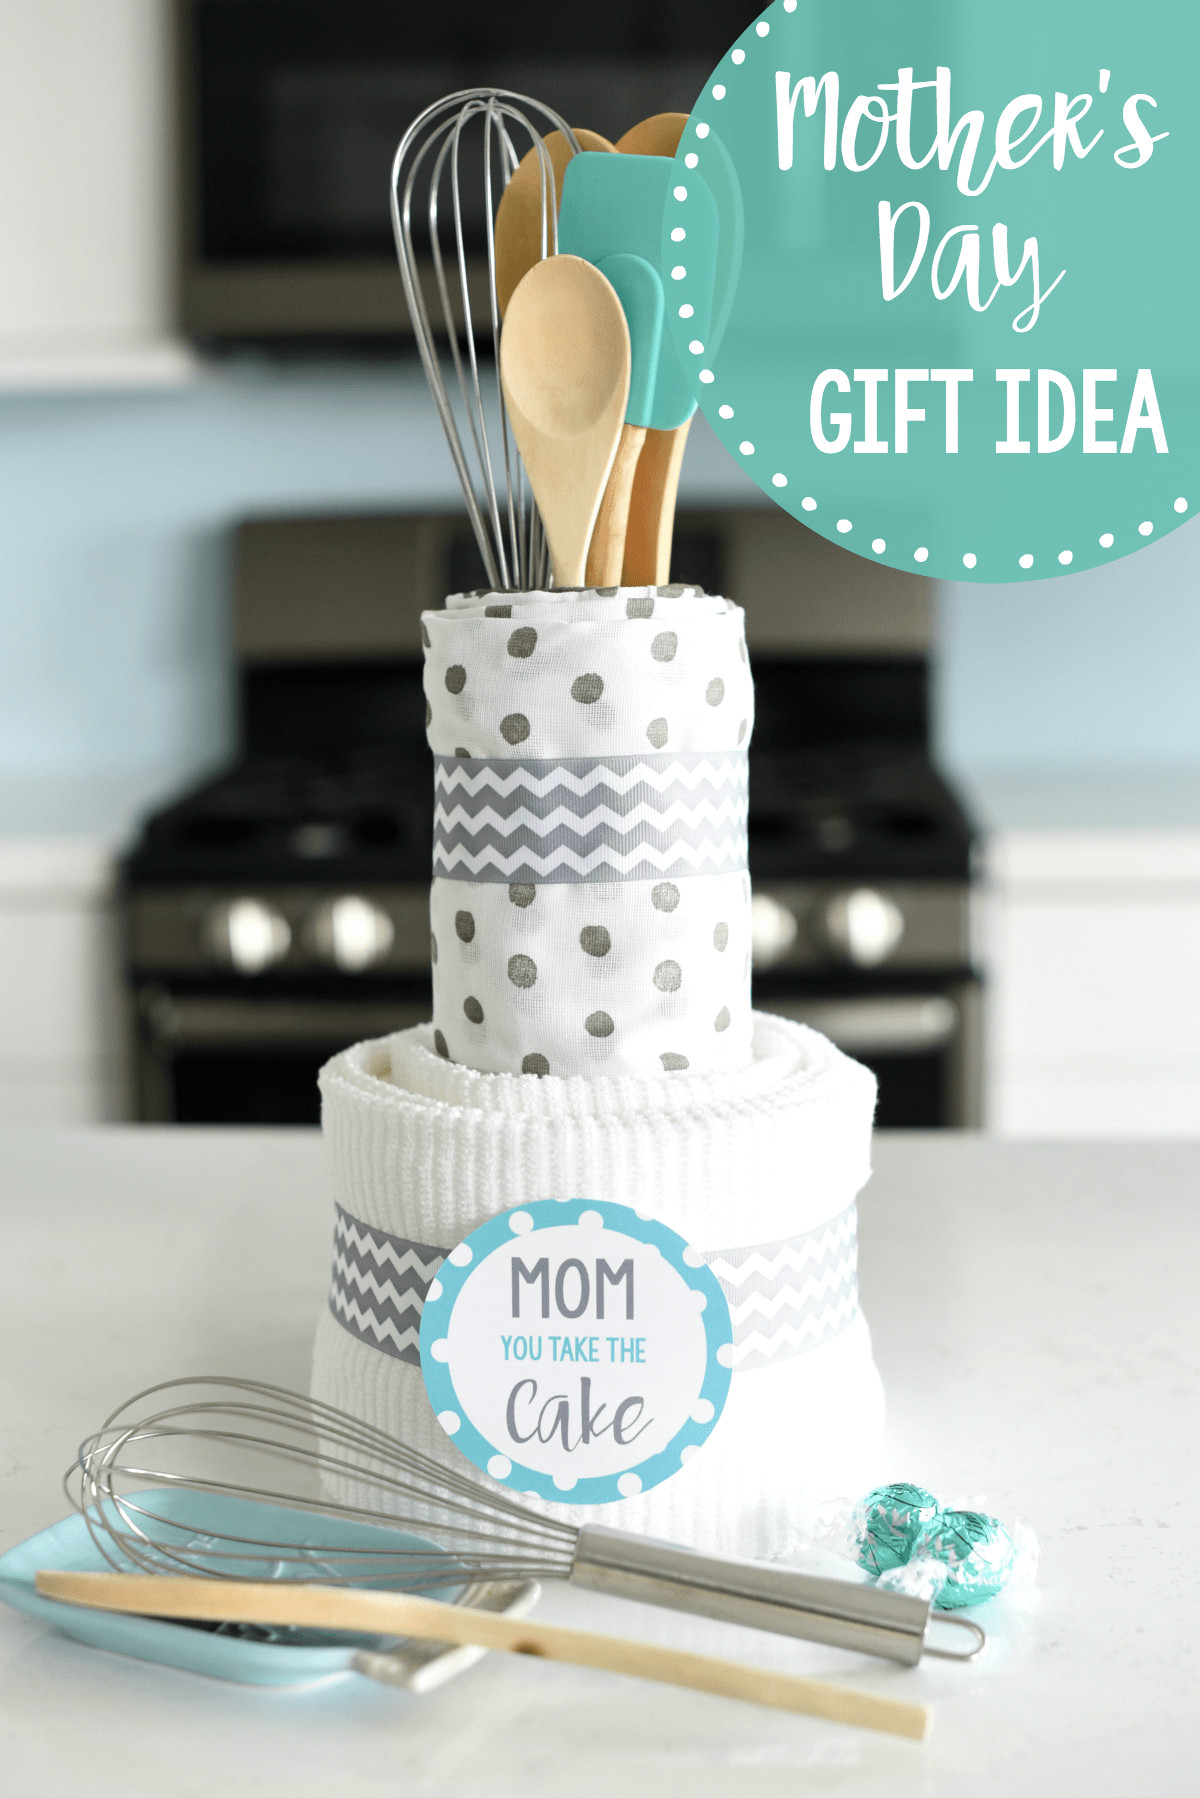 Valentine'S Day Gift Ideas For Mom
 Creative Mother s Day Gifts for Moms Who Love to Cook